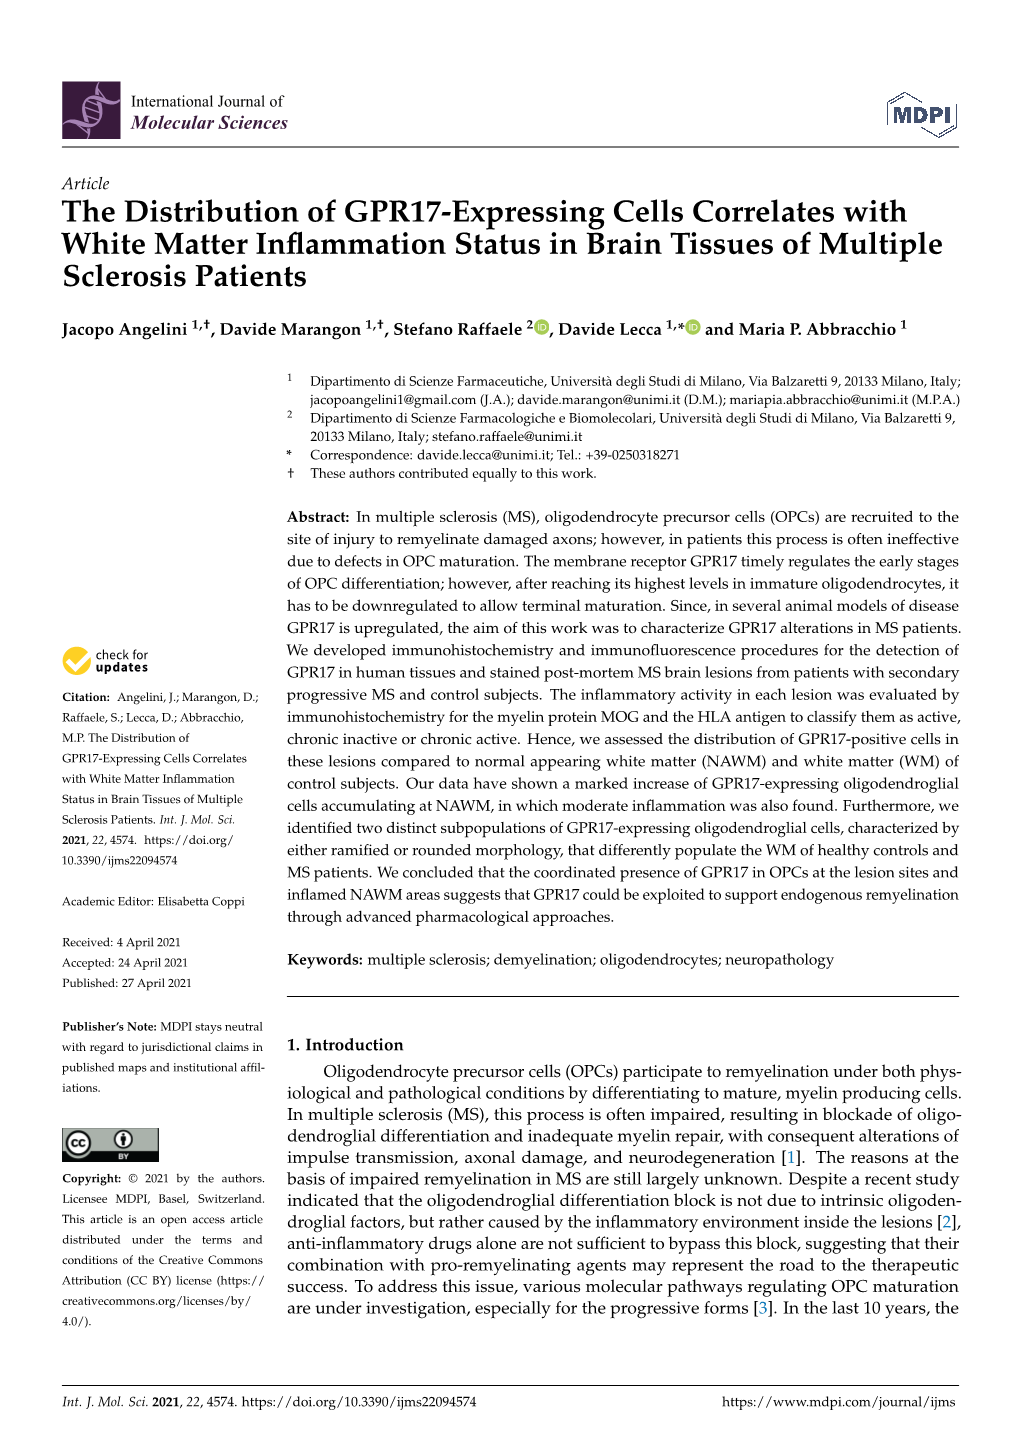 The Distribution of GPR17-Expressing Cells Correlates with White Matter Inﬂammation Status in Brain Tissues of Multiple Sclerosis Patients